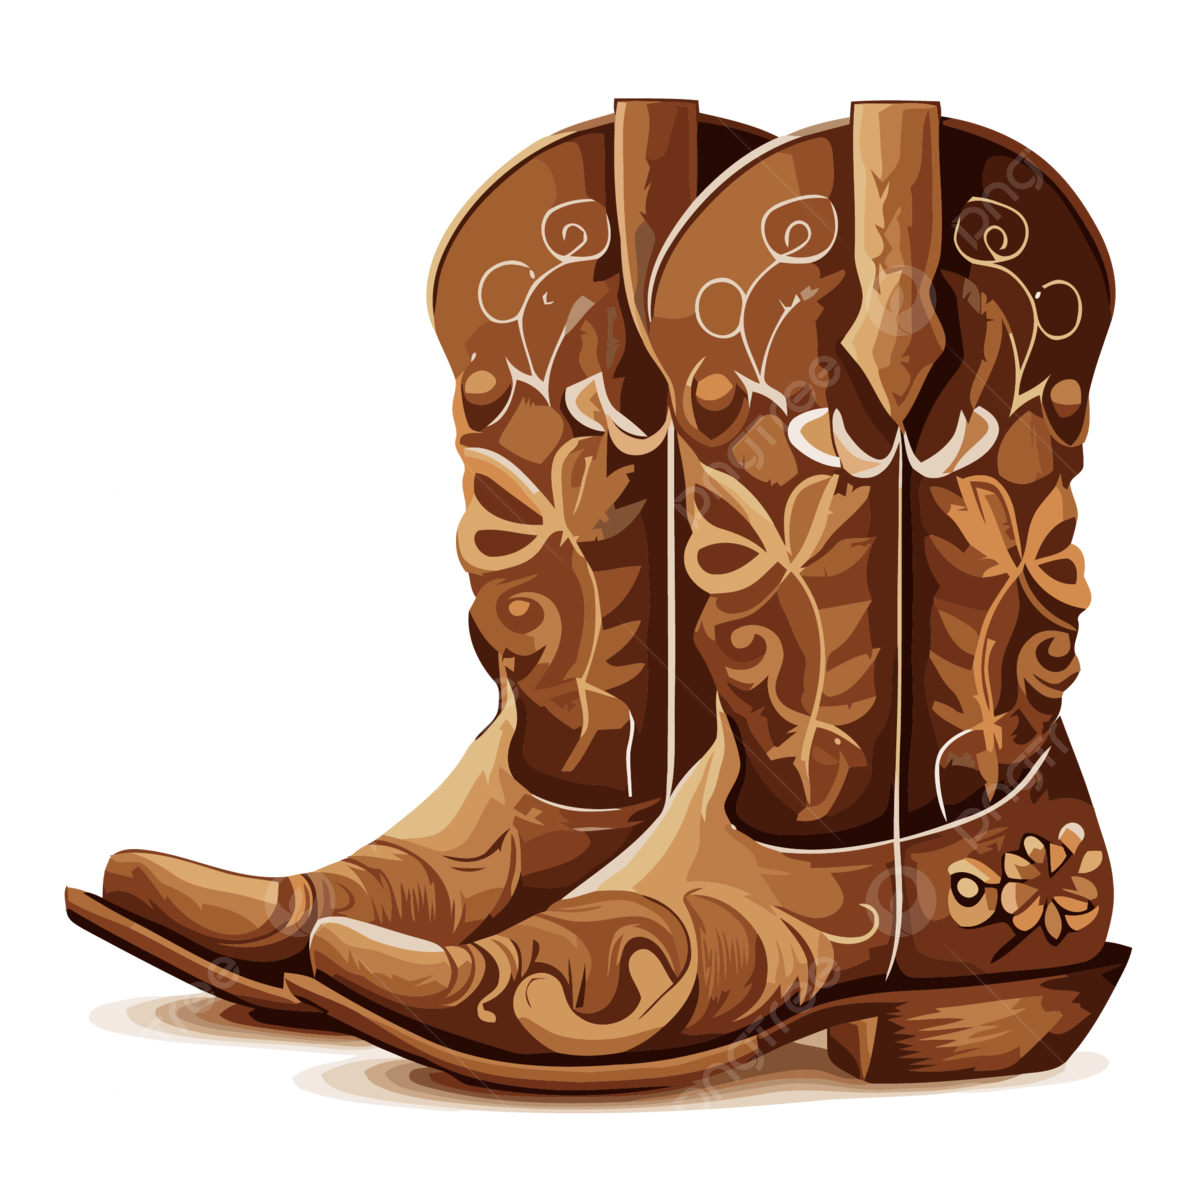 Cowgirl Boot PNG Image File